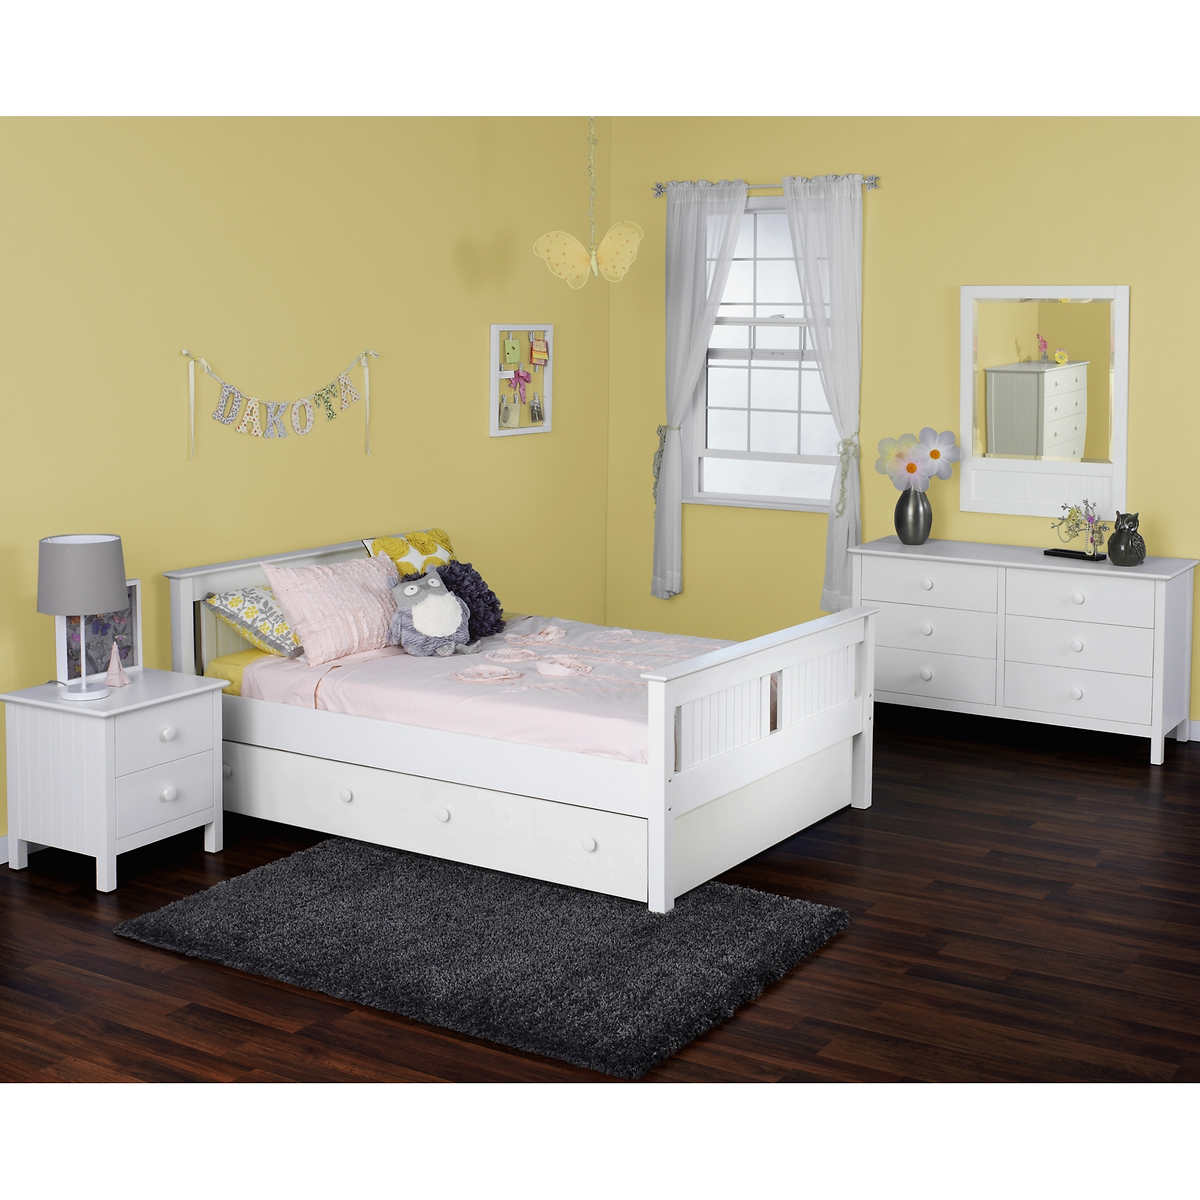 Jayden 4 Piece Full Bed With Trundle Set